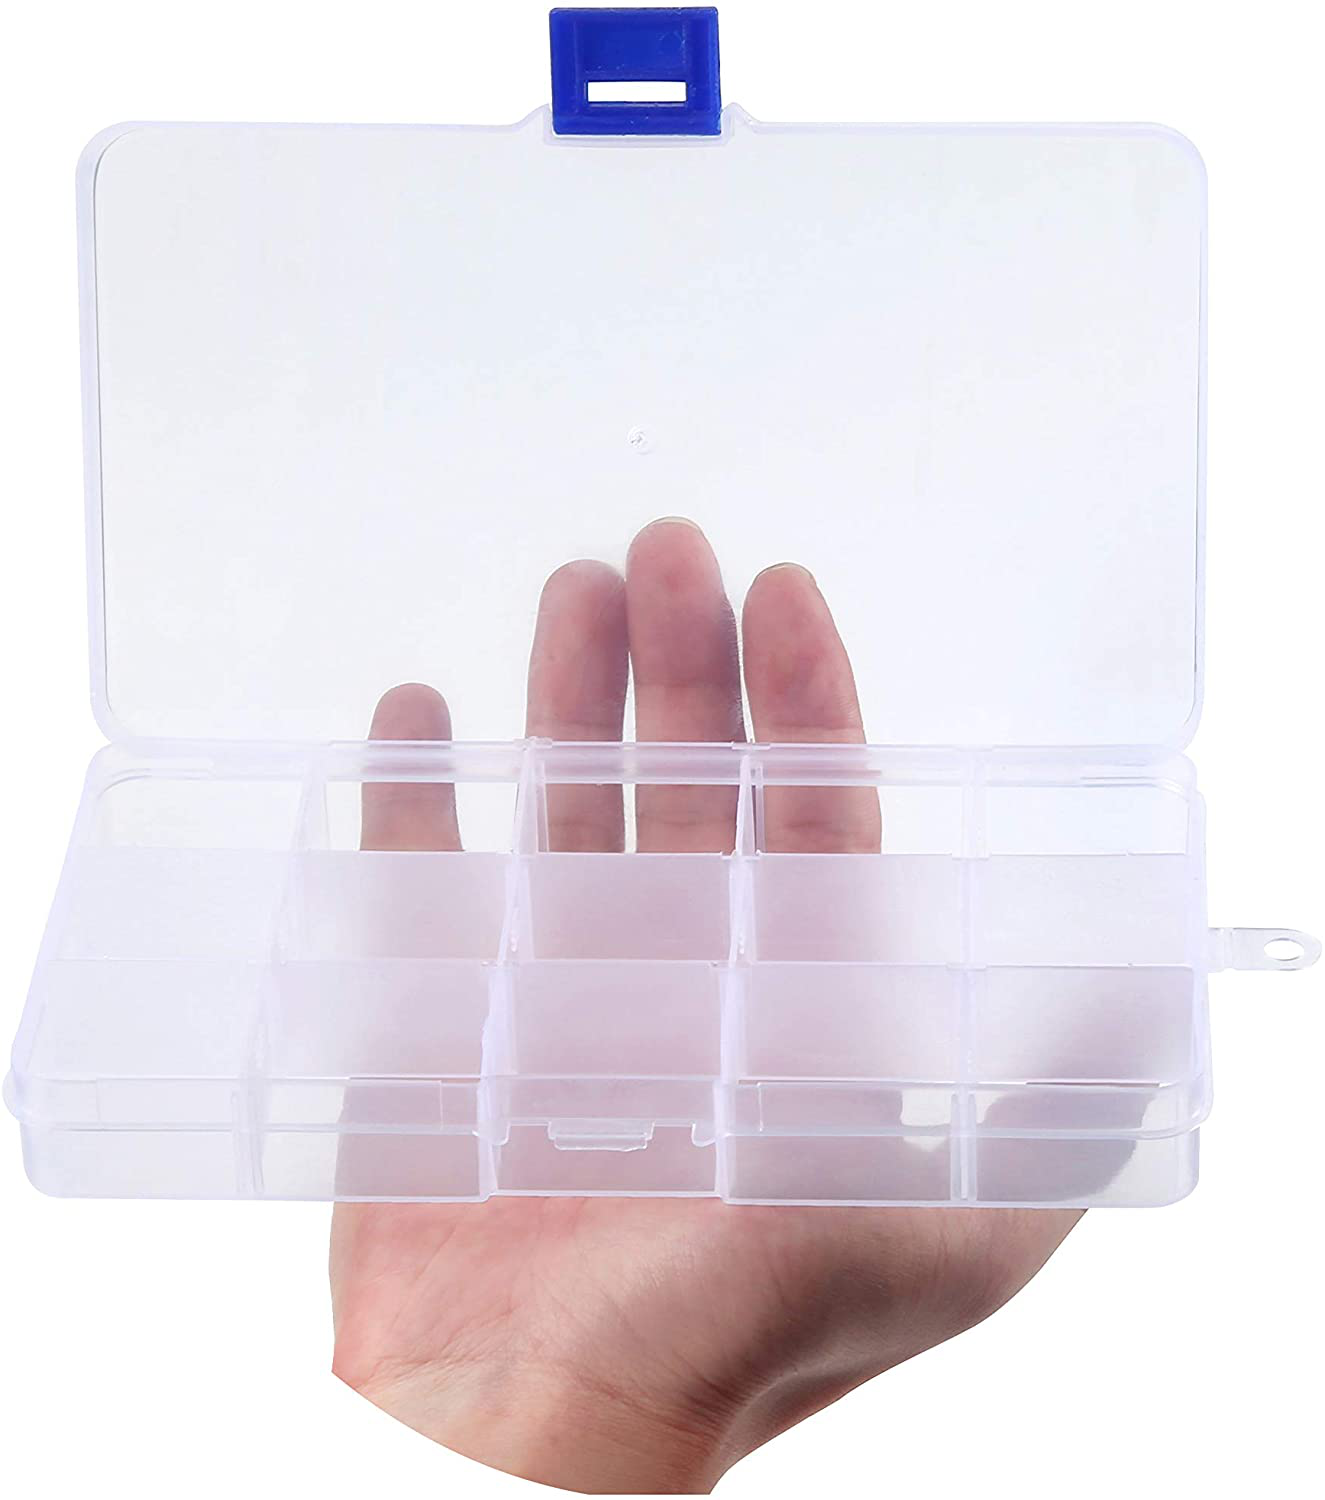 Organizer Box Adjustable Dividers - Plastic Compartment Storage Container for Washi Tapes, Craft, Beads, Jewelry, Small Parts